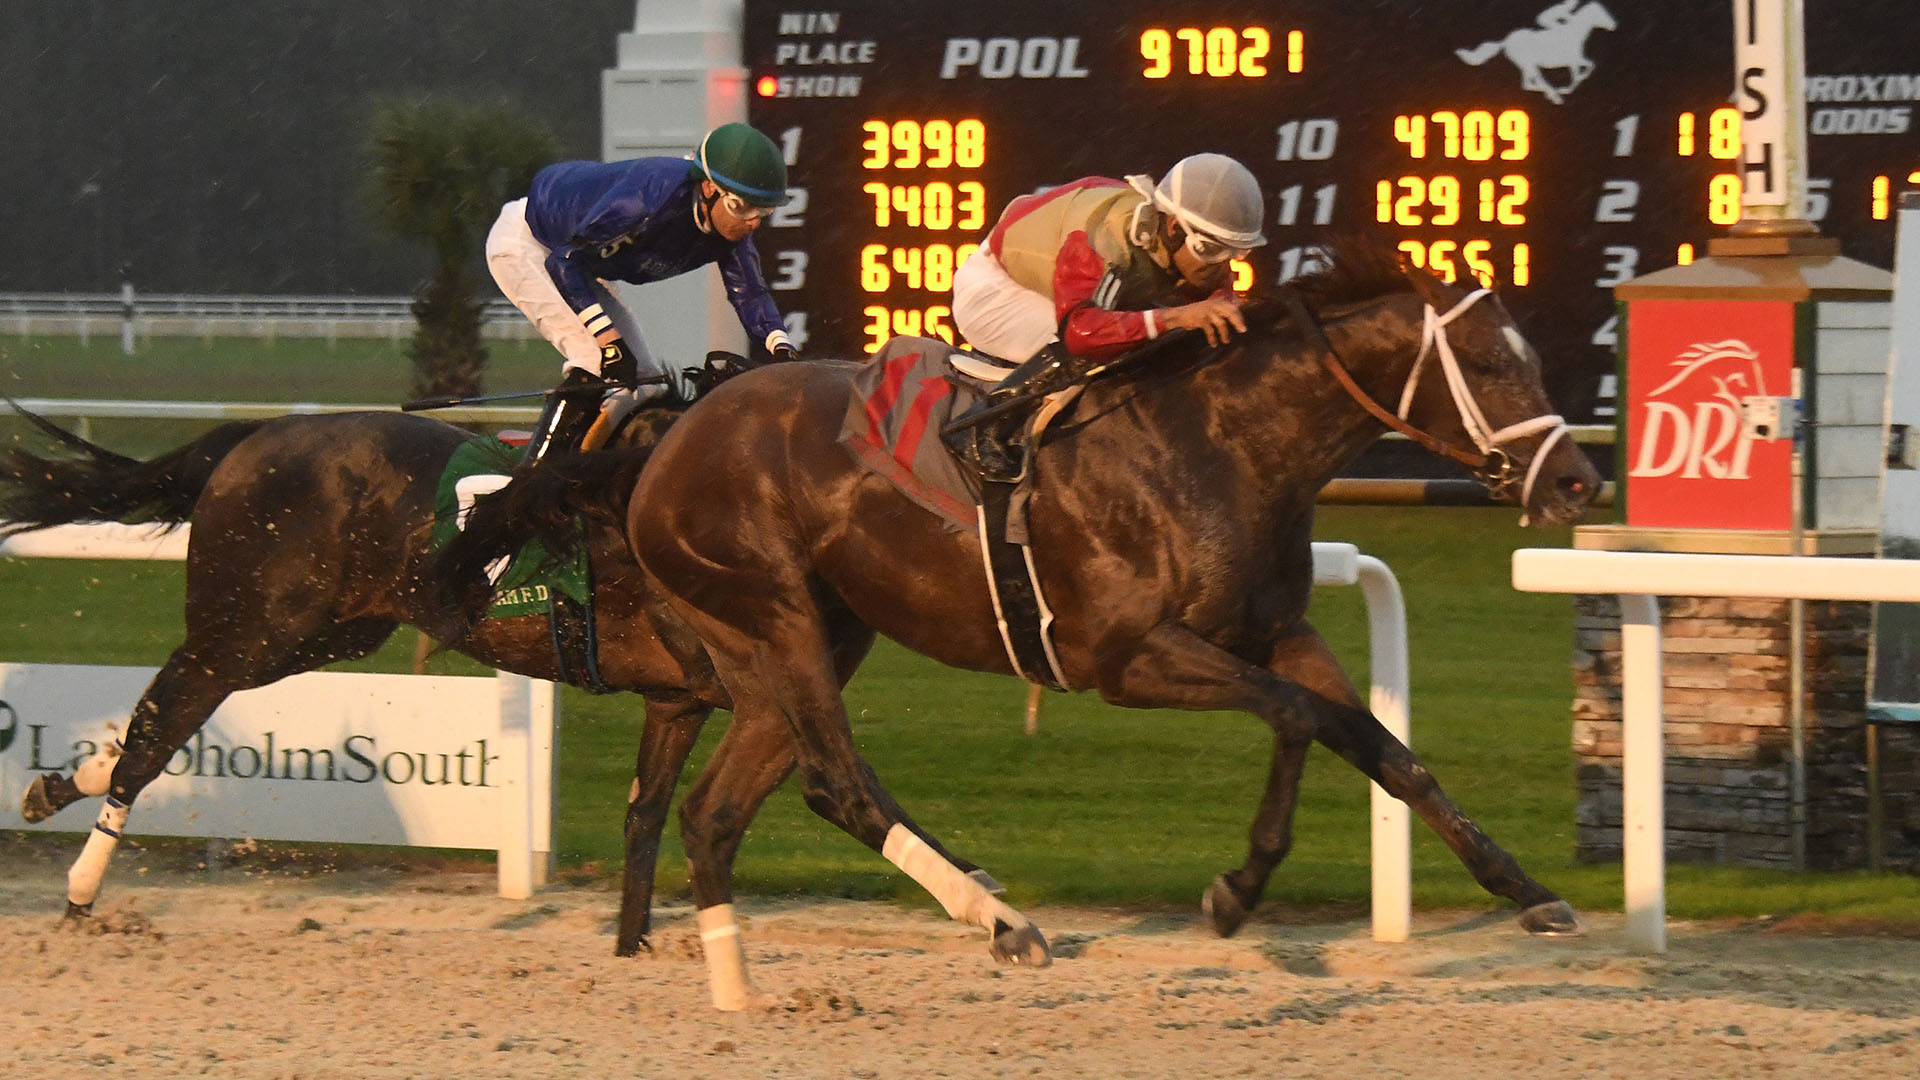 Litigate takes the G3 Sam F. Davis Stakes at Tampa Bay Downs. Litigate is a part of the Elmont, LLC thoroughbred racing partnership.